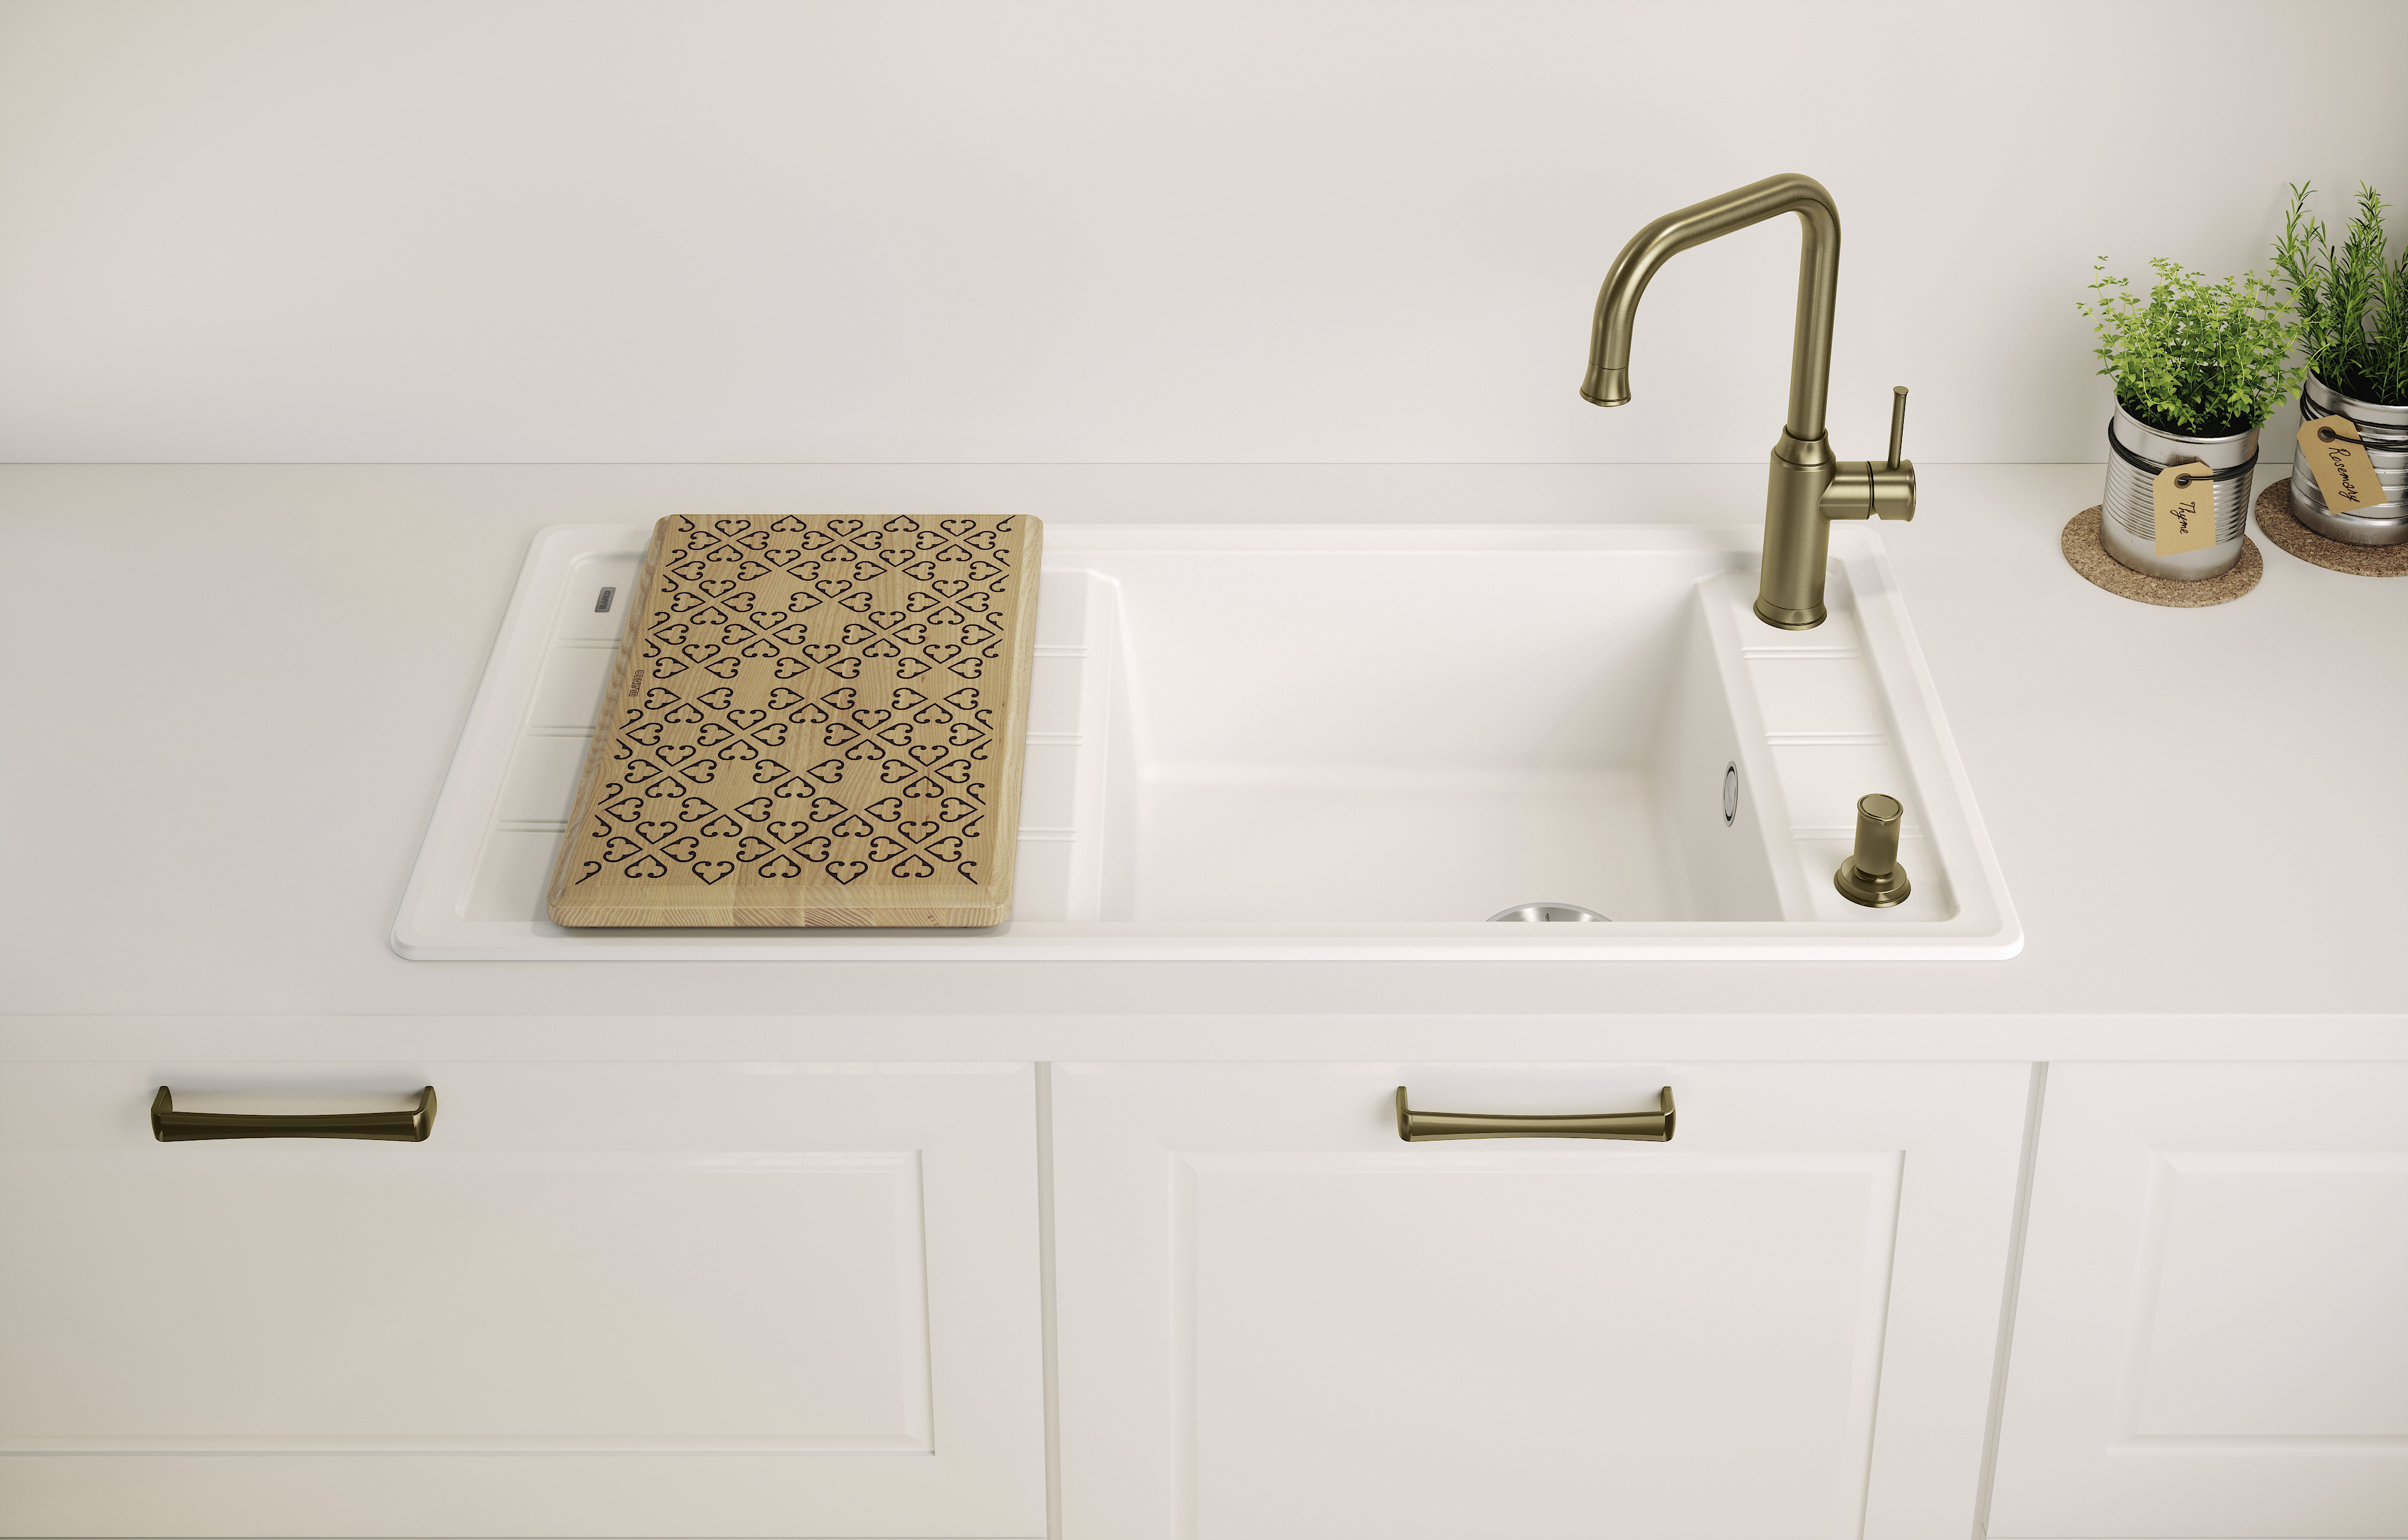 How to care for light colored sinks